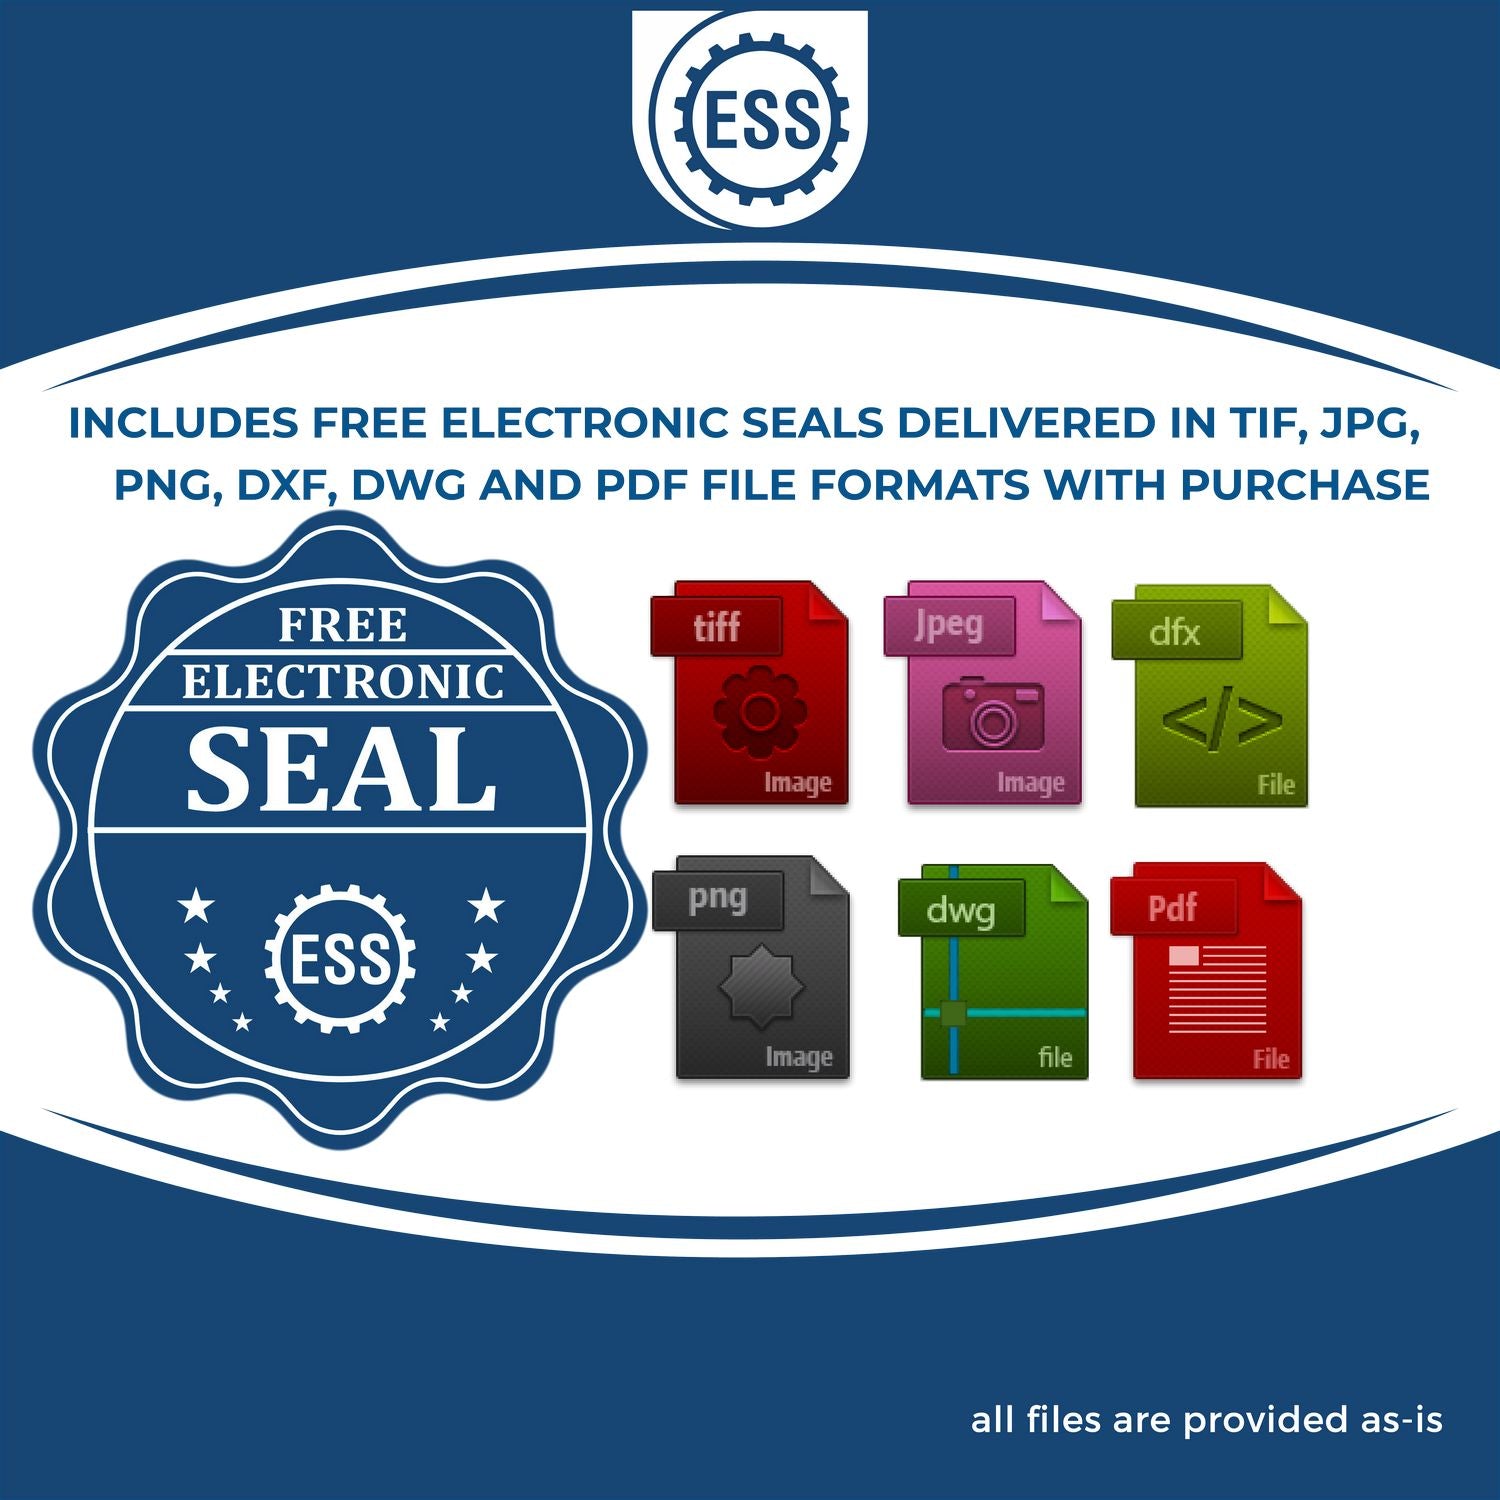 An infographic for the free electronic seal for the Heavy Duty Cast Iron North Carolina Architect Embosser illustrating the different file type icons such as DXF, DWG, TIF, JPG and PNG.